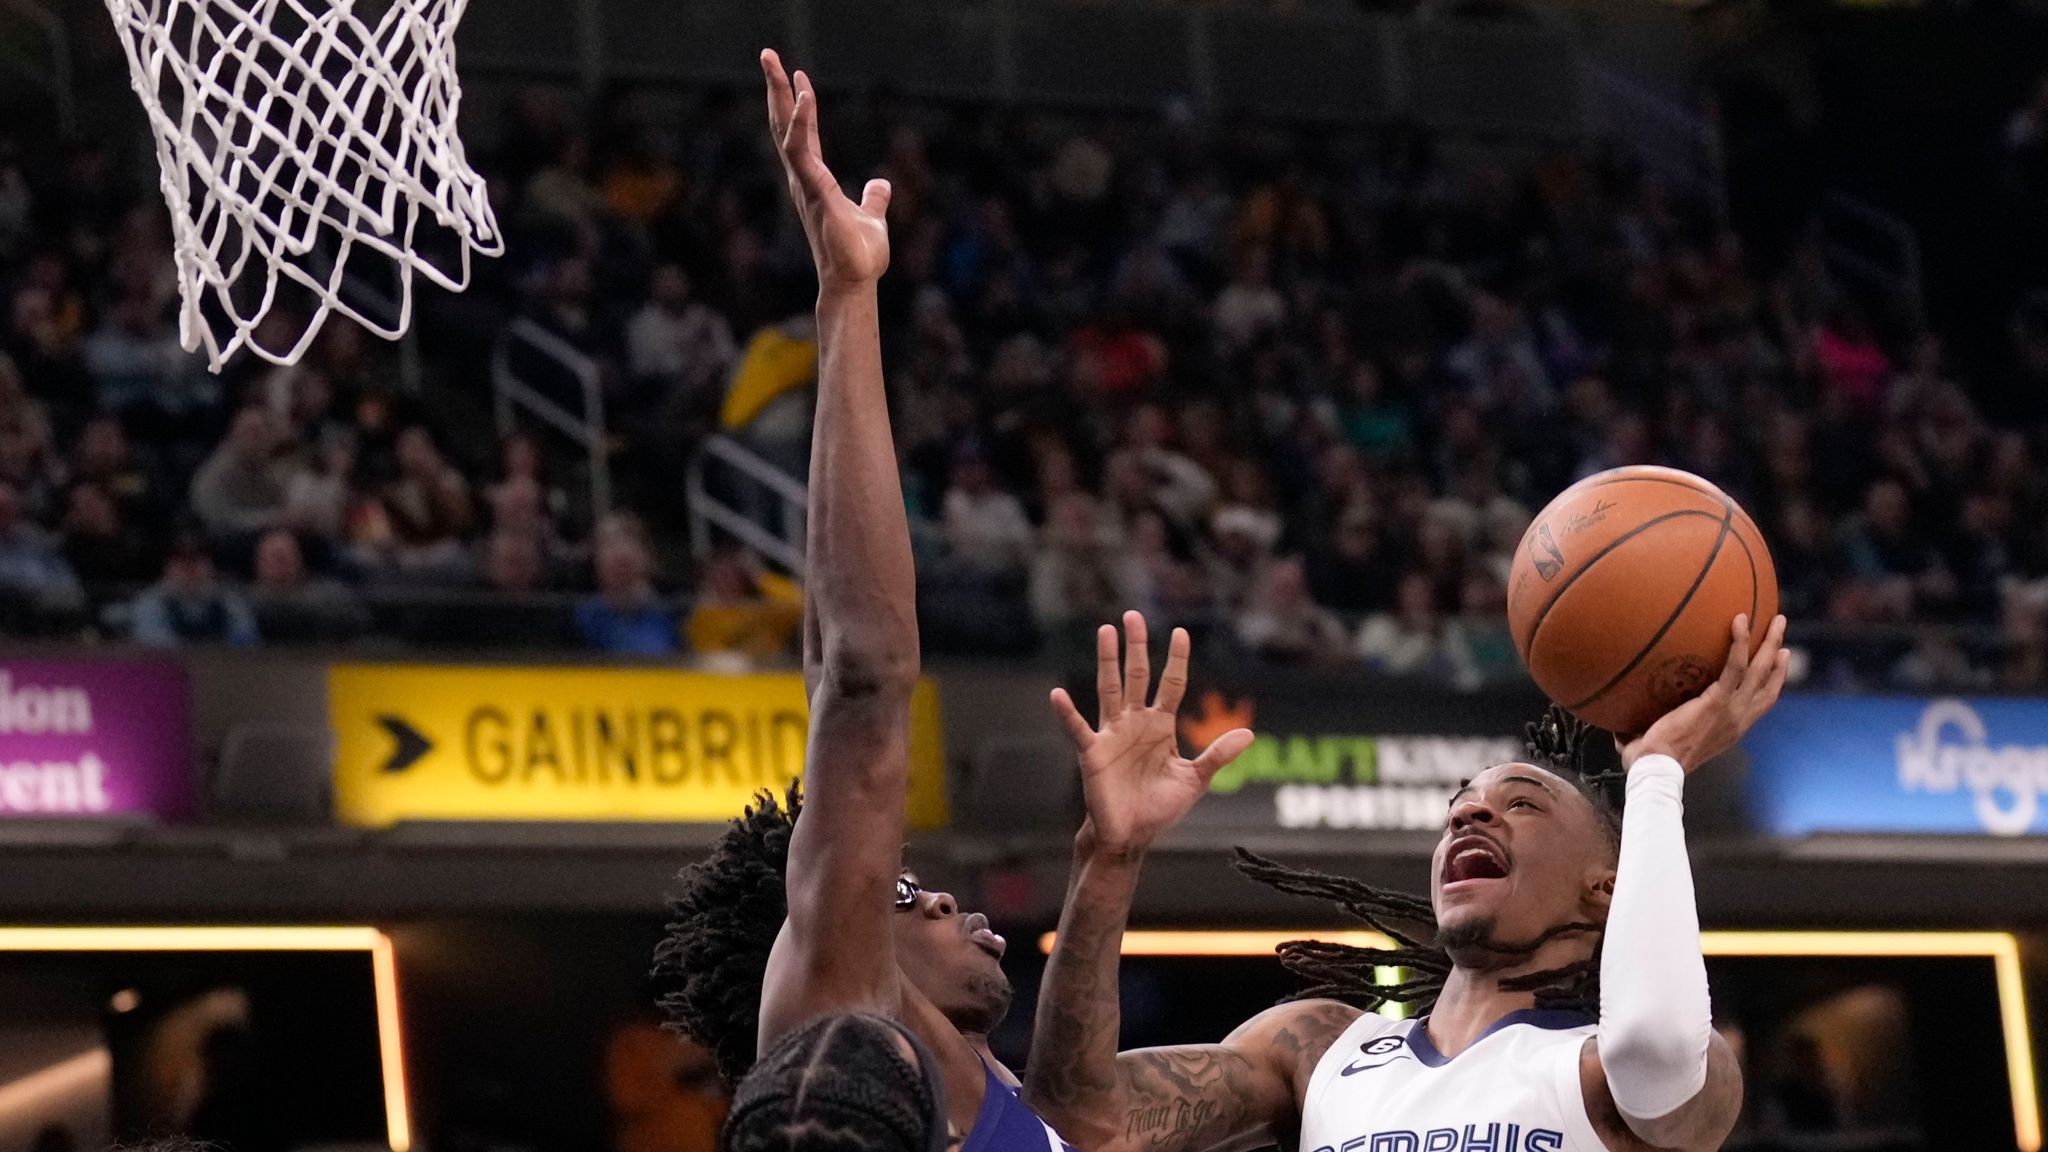 Ja Morant: Memphis Grizzlies lose second straight game without